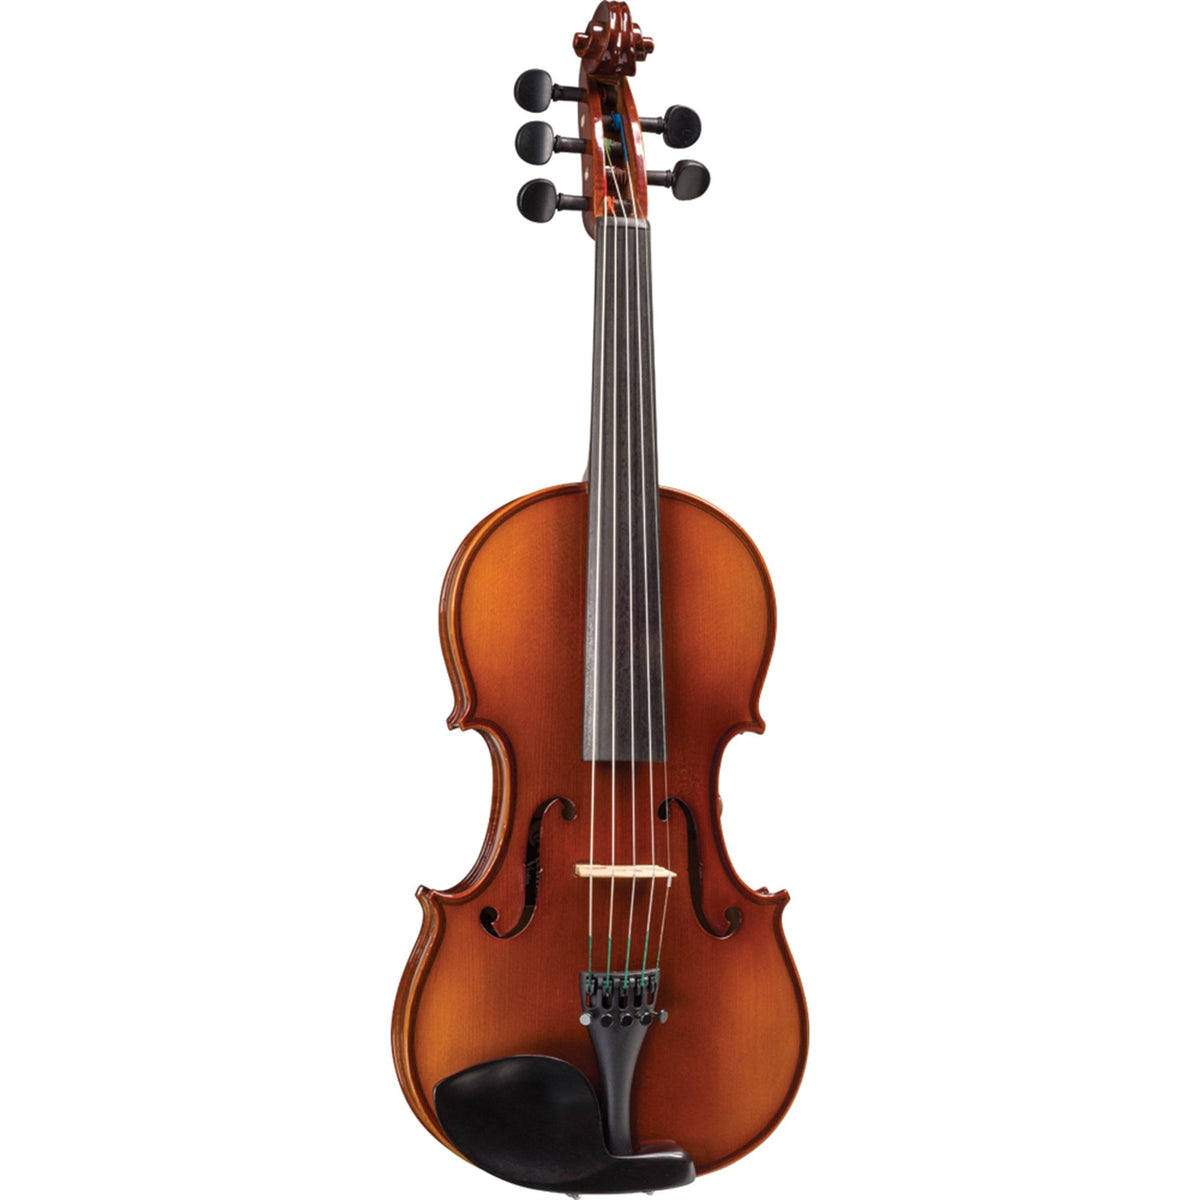 Realist Acoustic-Electric 5-string Violin with Case